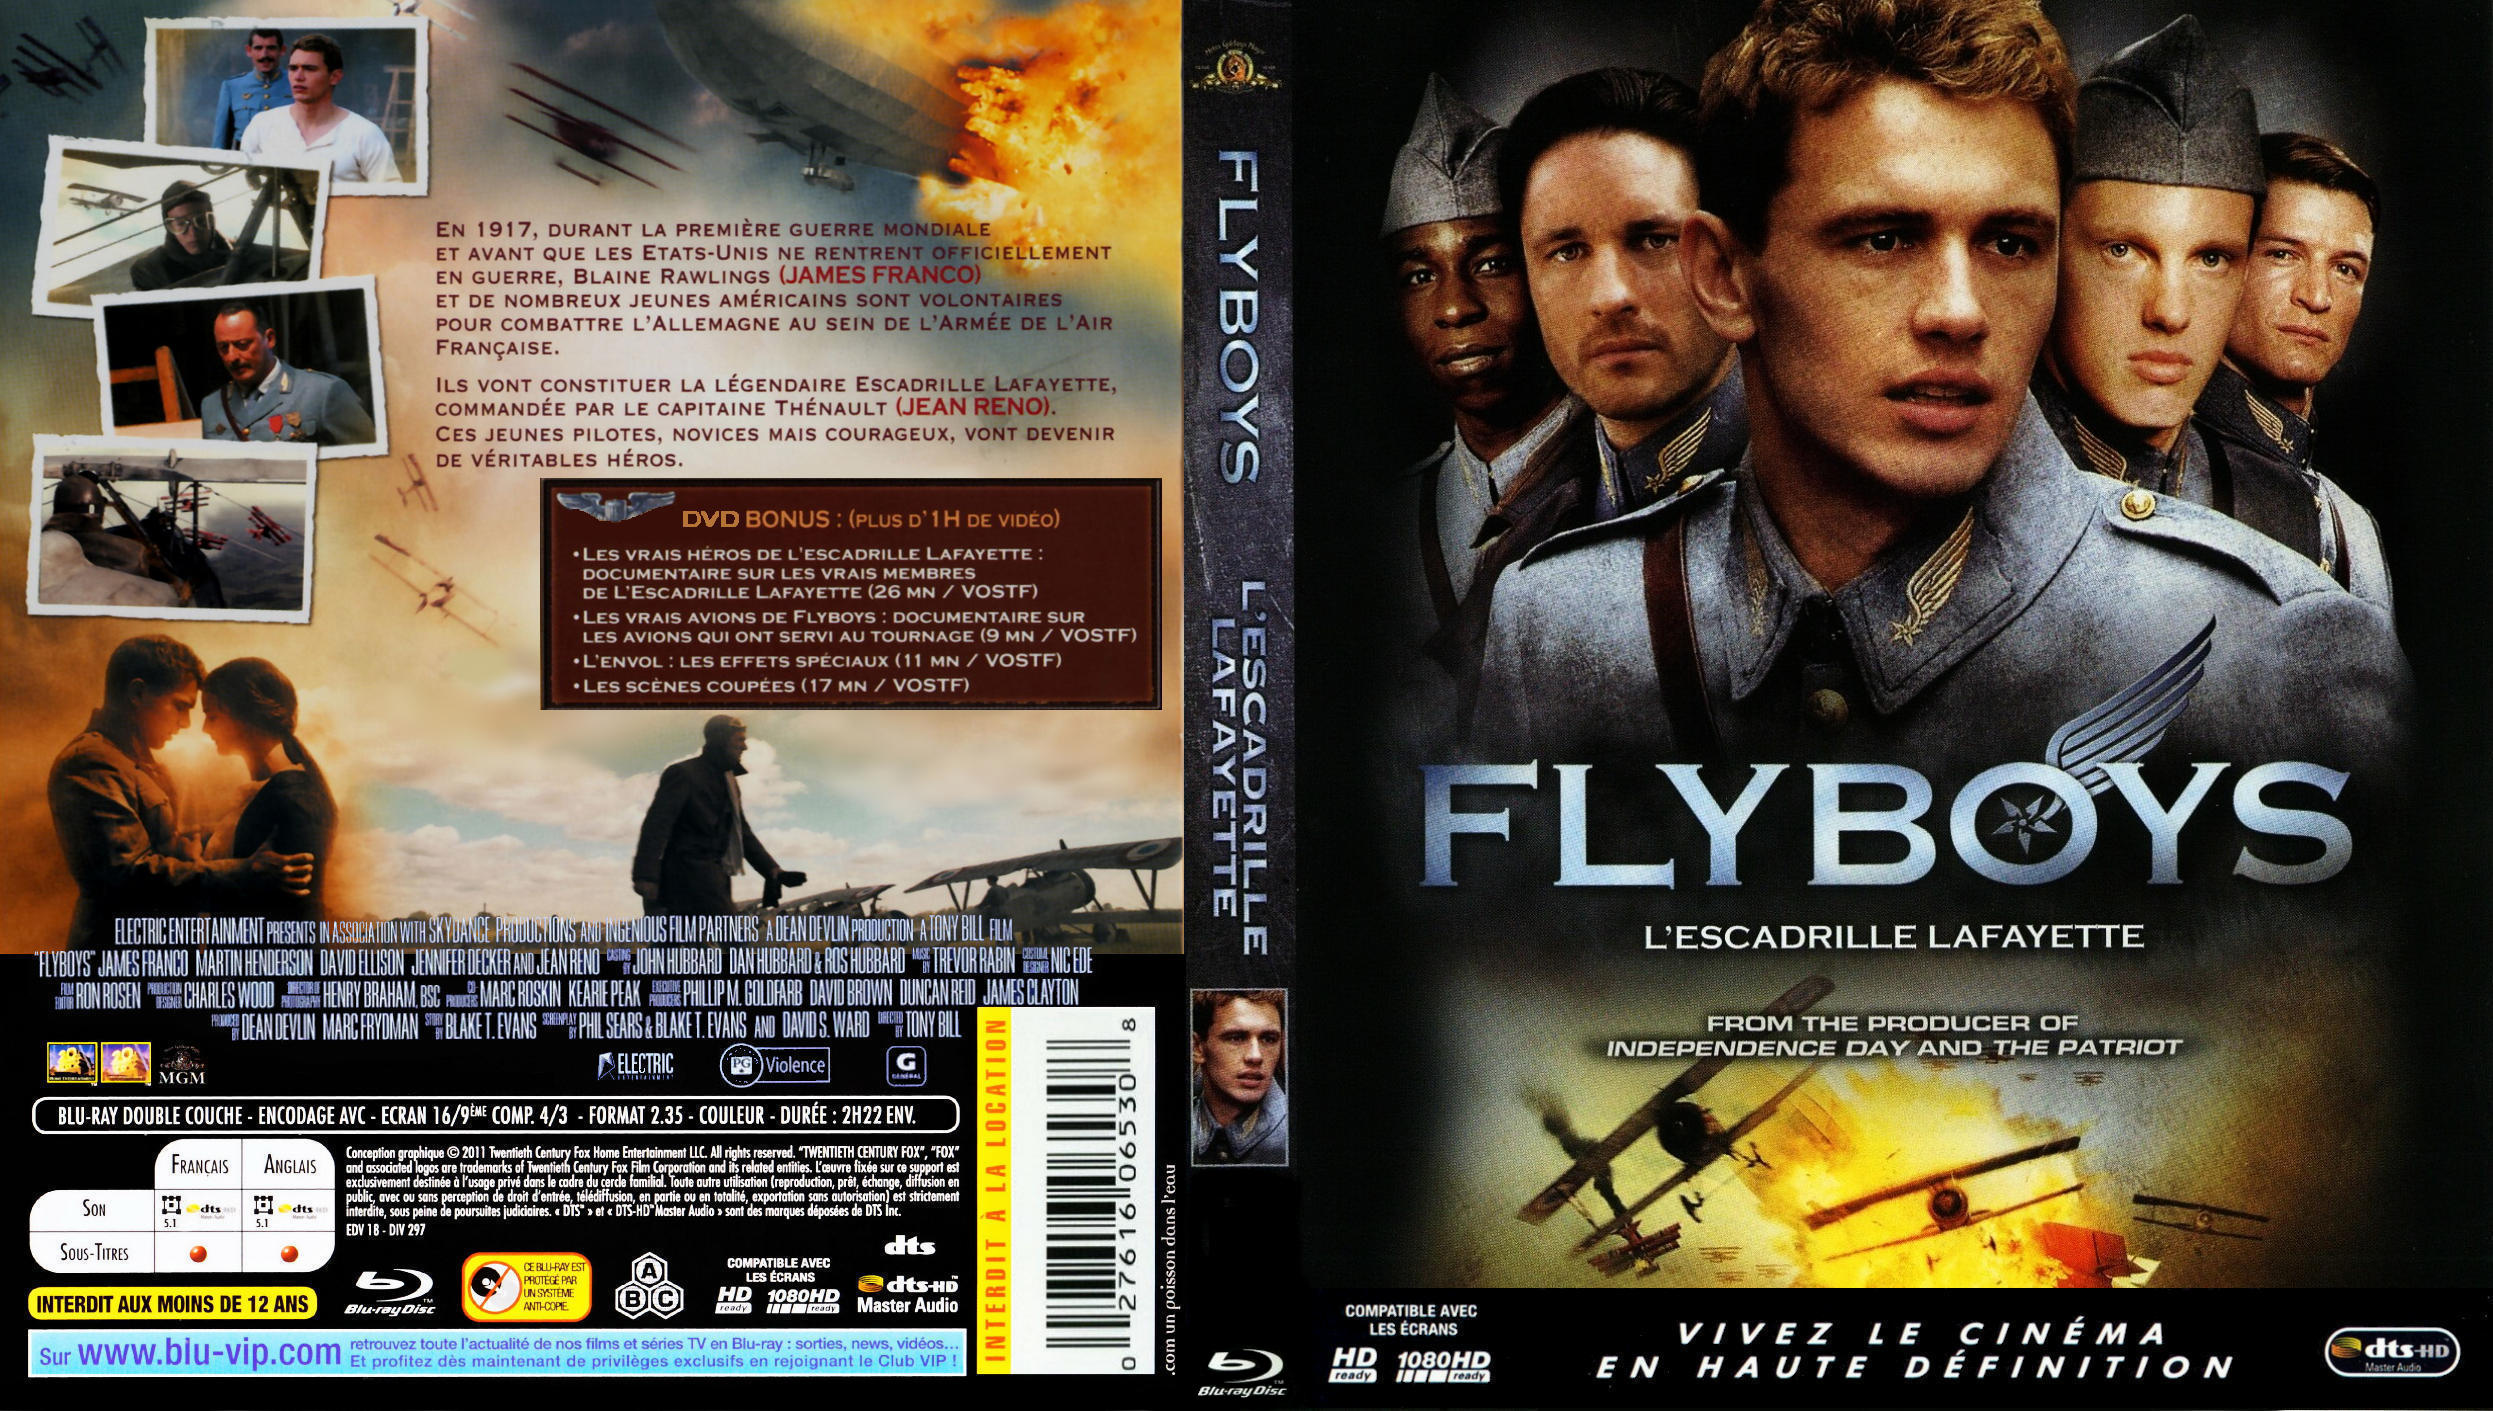 The Flyboys 2006